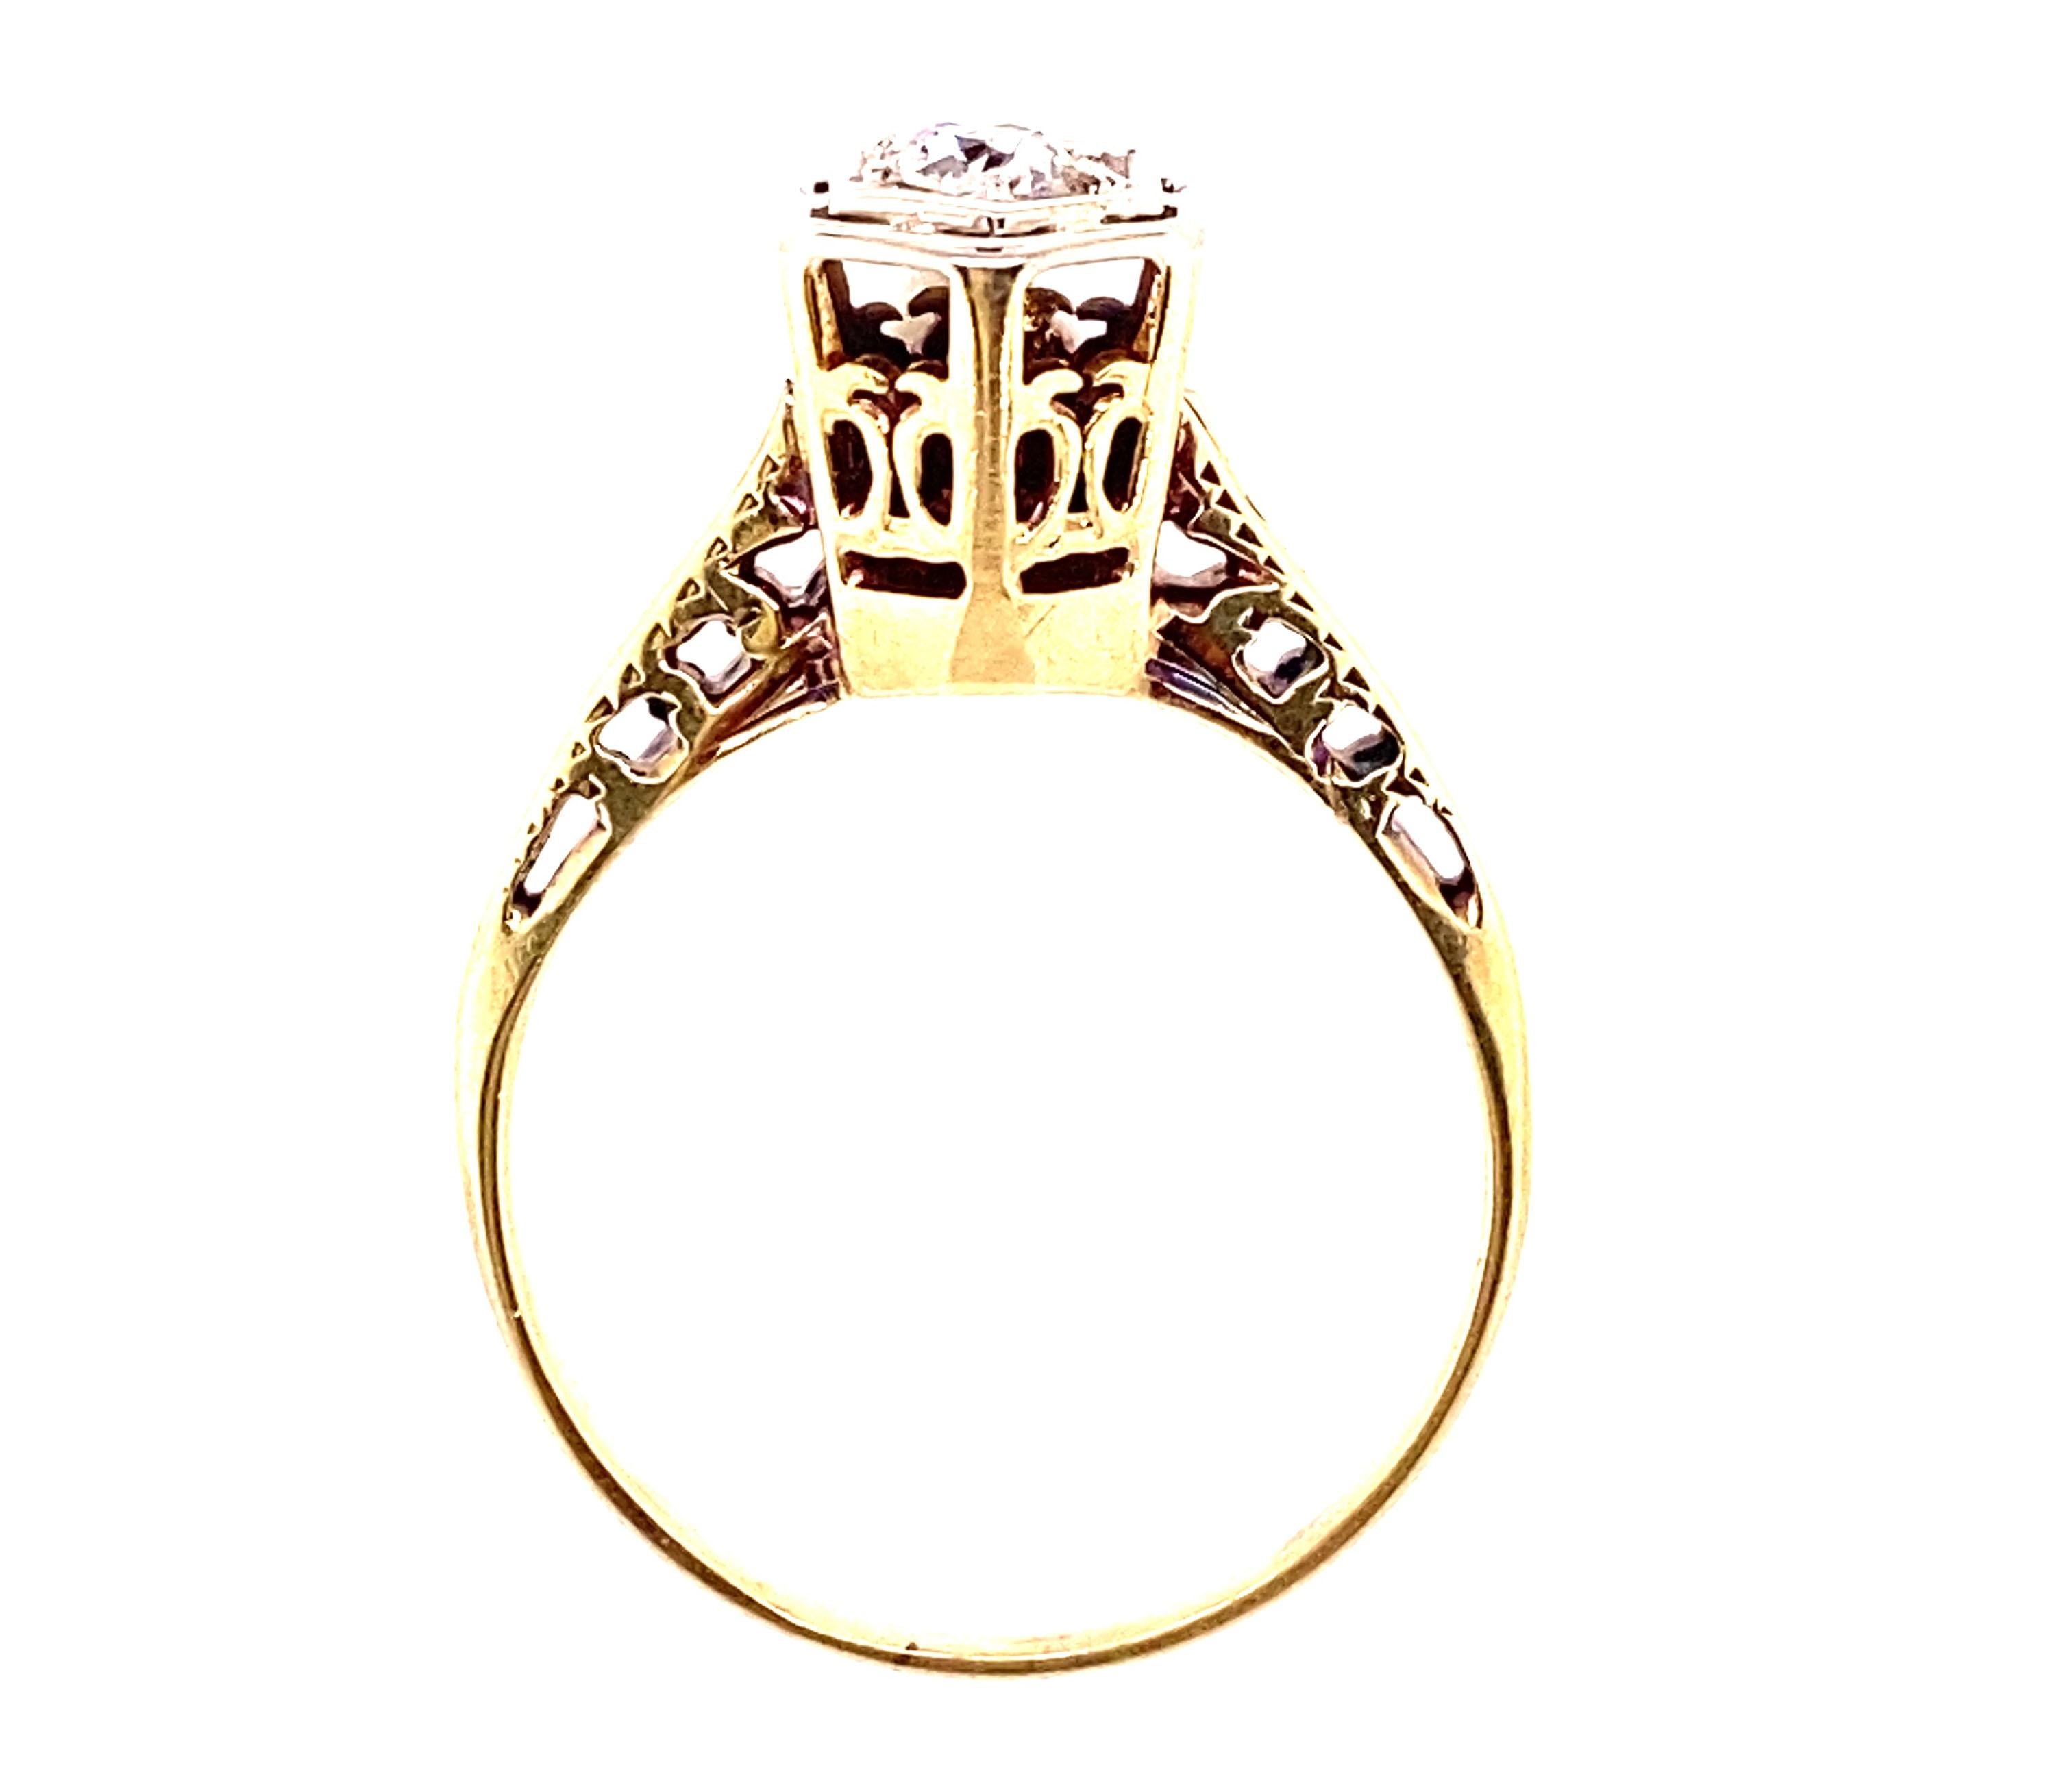 Genuine Original Art Deco Antique from 1940's Solitaire Engagement Ring .22ct Old European Cut Diamond 14K Gold


Featuring a Gorgeous Genuine F/VS .22ct Natural Old European Cut Natural Mined Diamond Center

Rare Yellow Gold with White Gold Top Art